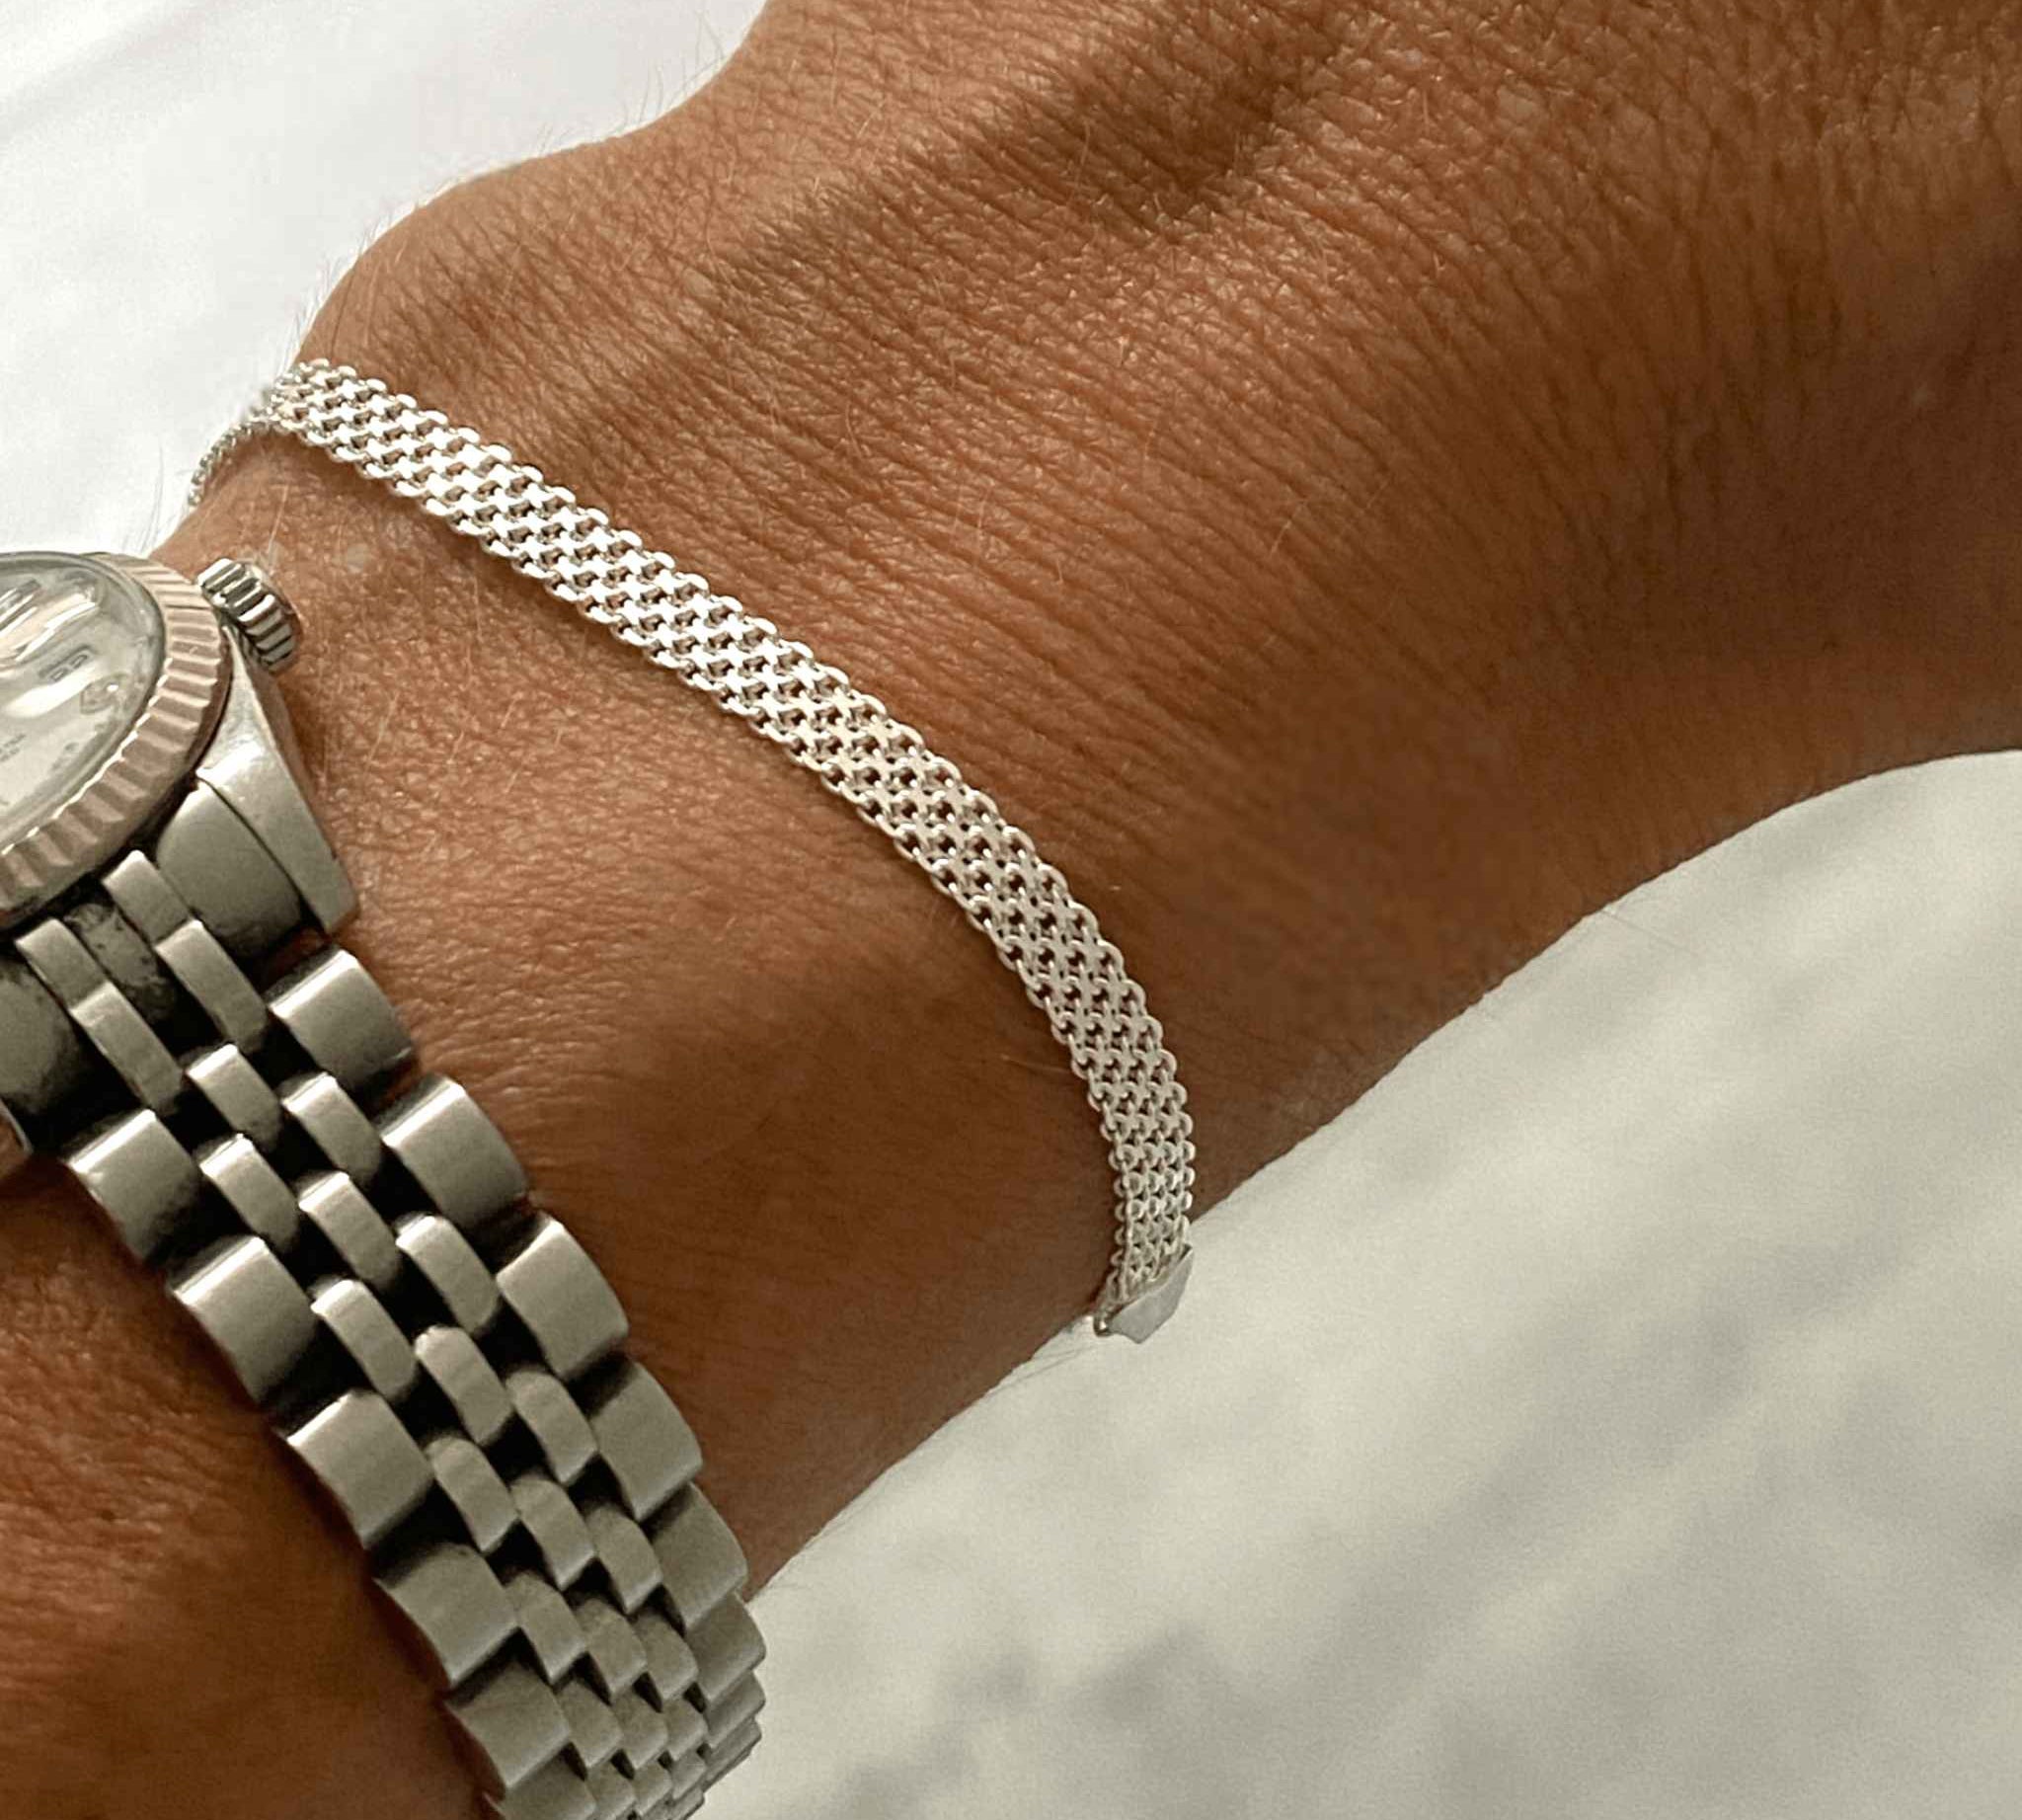 Detailed view of the sterling silver mesh bracelet for women, showcasing its intricate design.